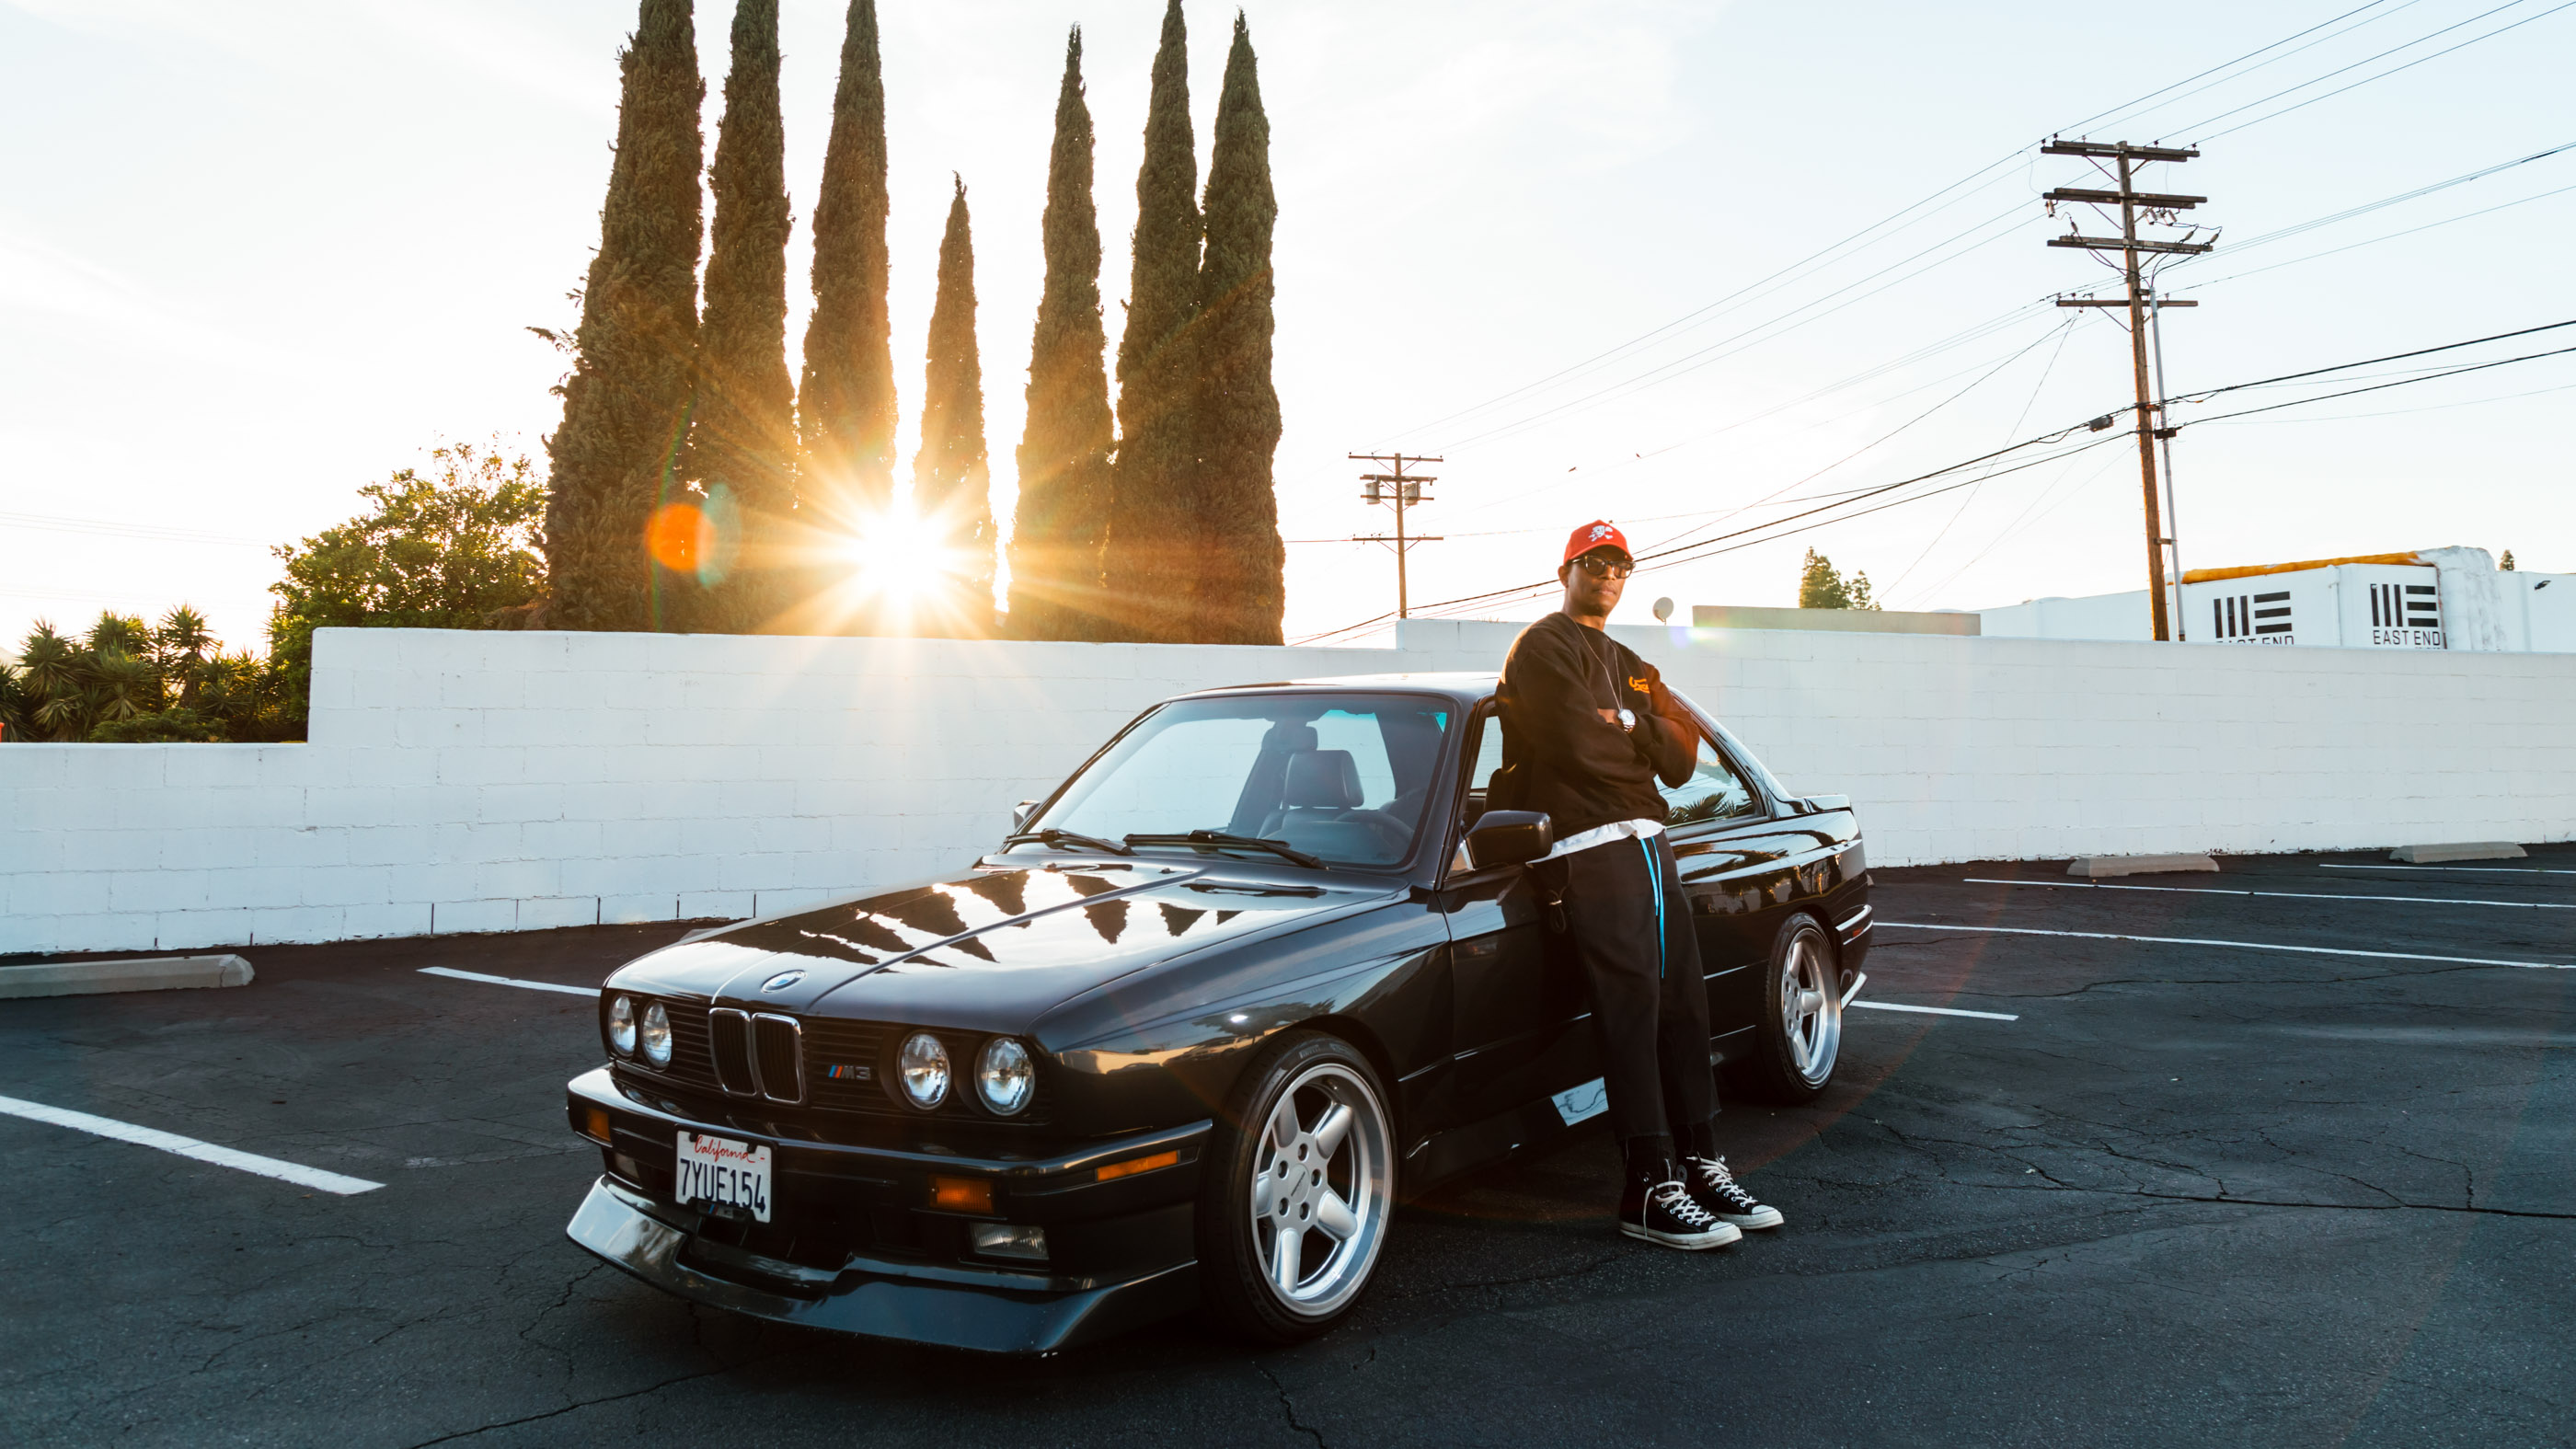 Buy yourself a BMW E30 M3 while you still can